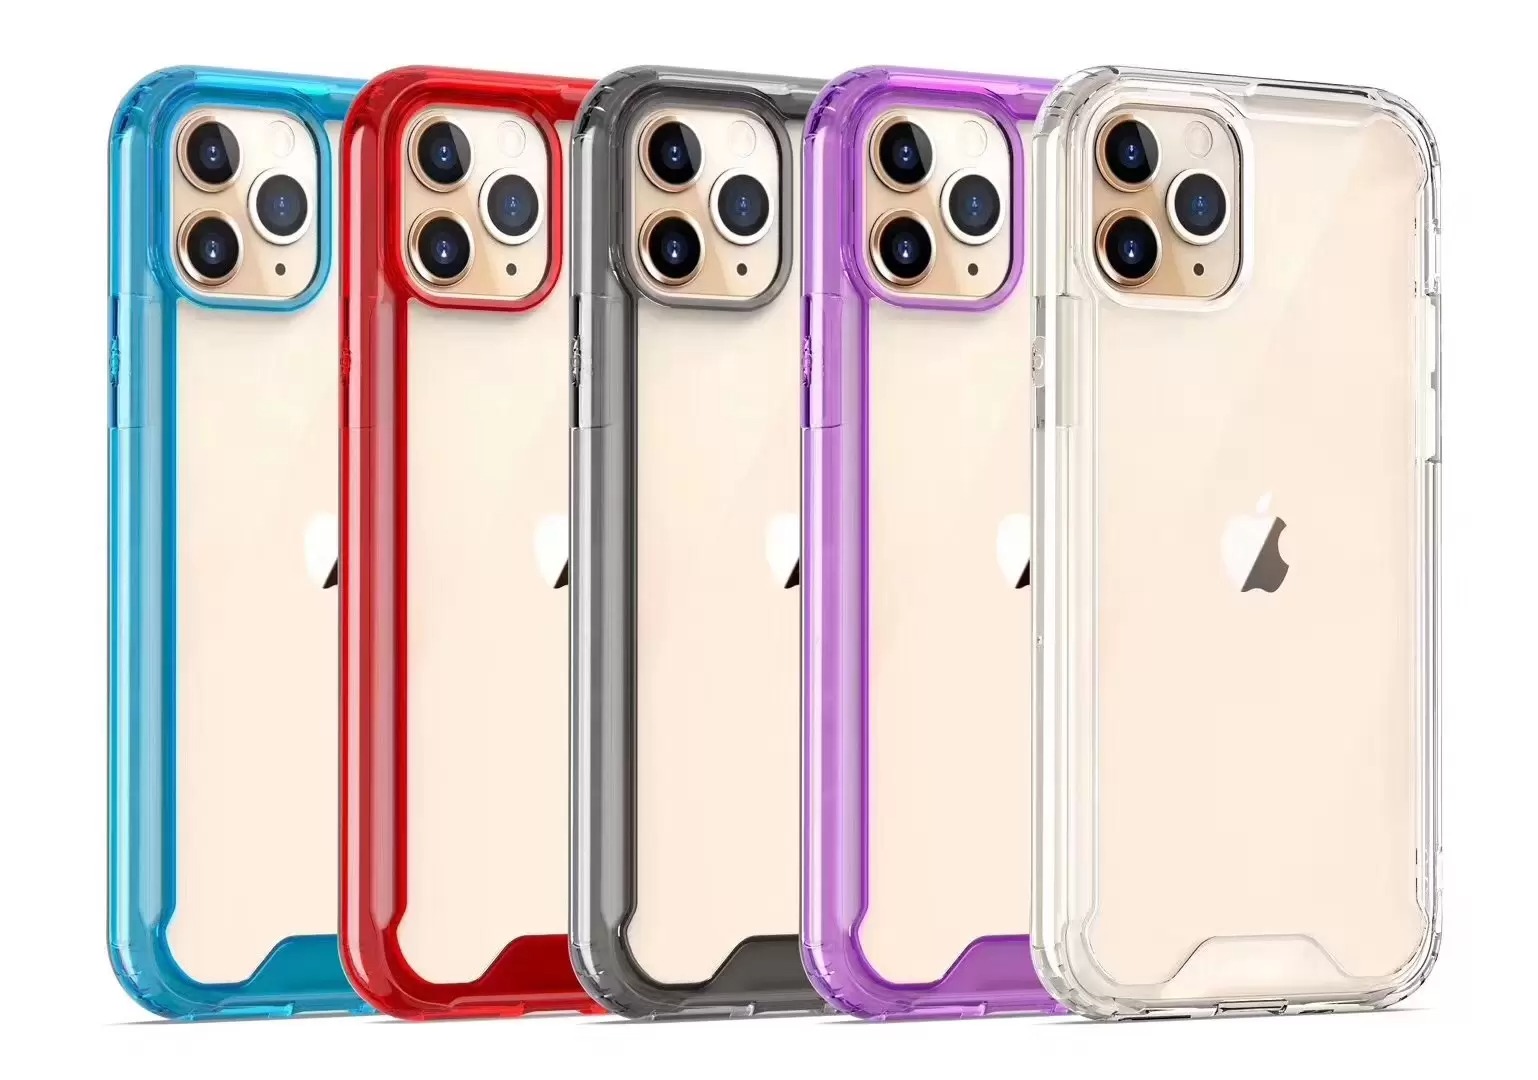 

Clear Acrylic TPU PC Shockproof Phone Cases for iPhone 13 12 Mini 11 Pro Max XR XS 6 7 8 Plus Samsung Note20 S20 S21 S22 Ultra A12 A22 A32 A52 A72 S21FE, Tell us colors